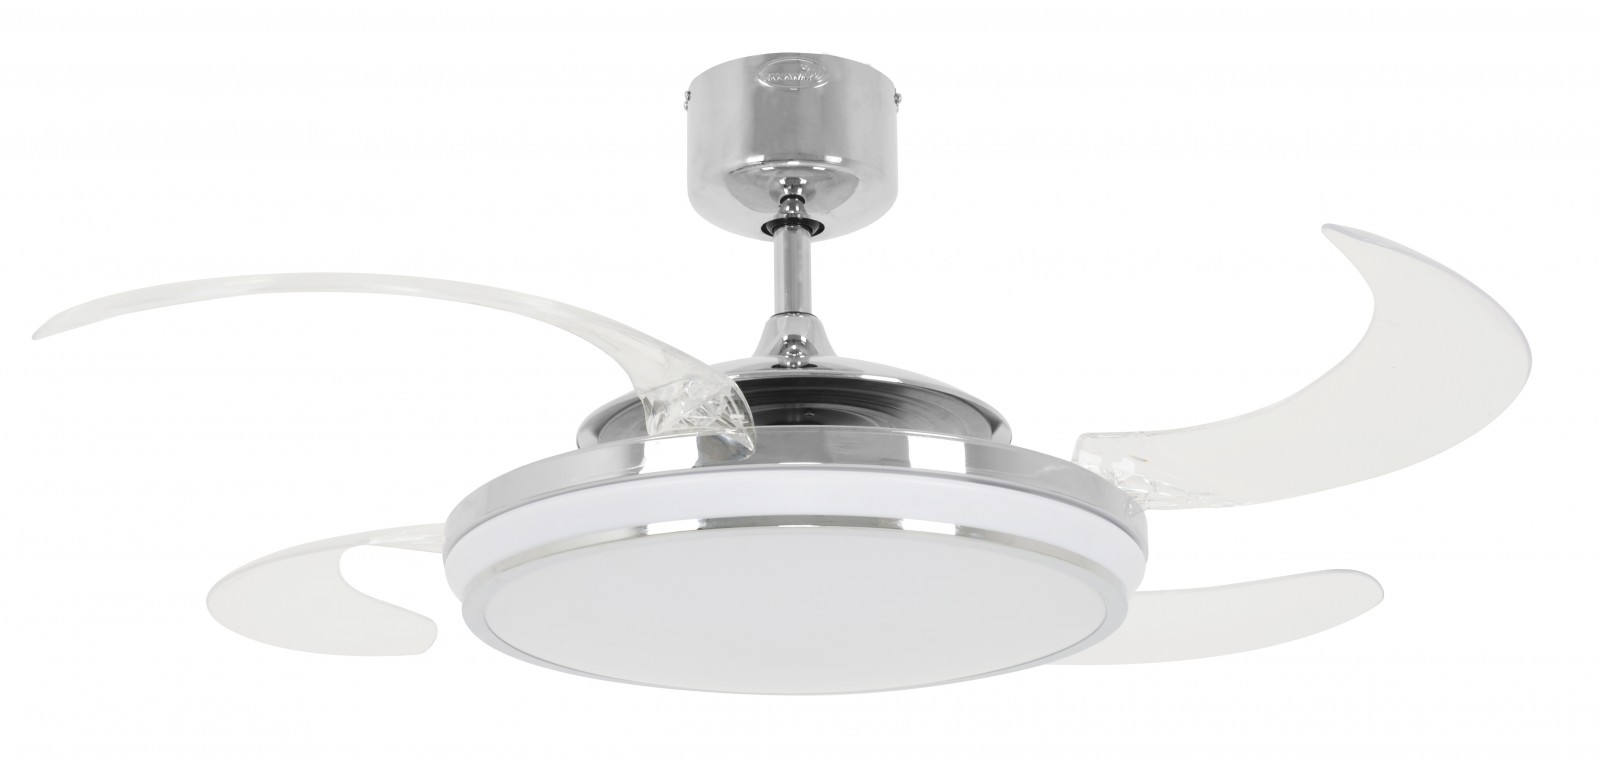 Dimmable Led Ceiling Fan Fanaway Evo1 Chrome With Retractable Blades 122 Cm 48